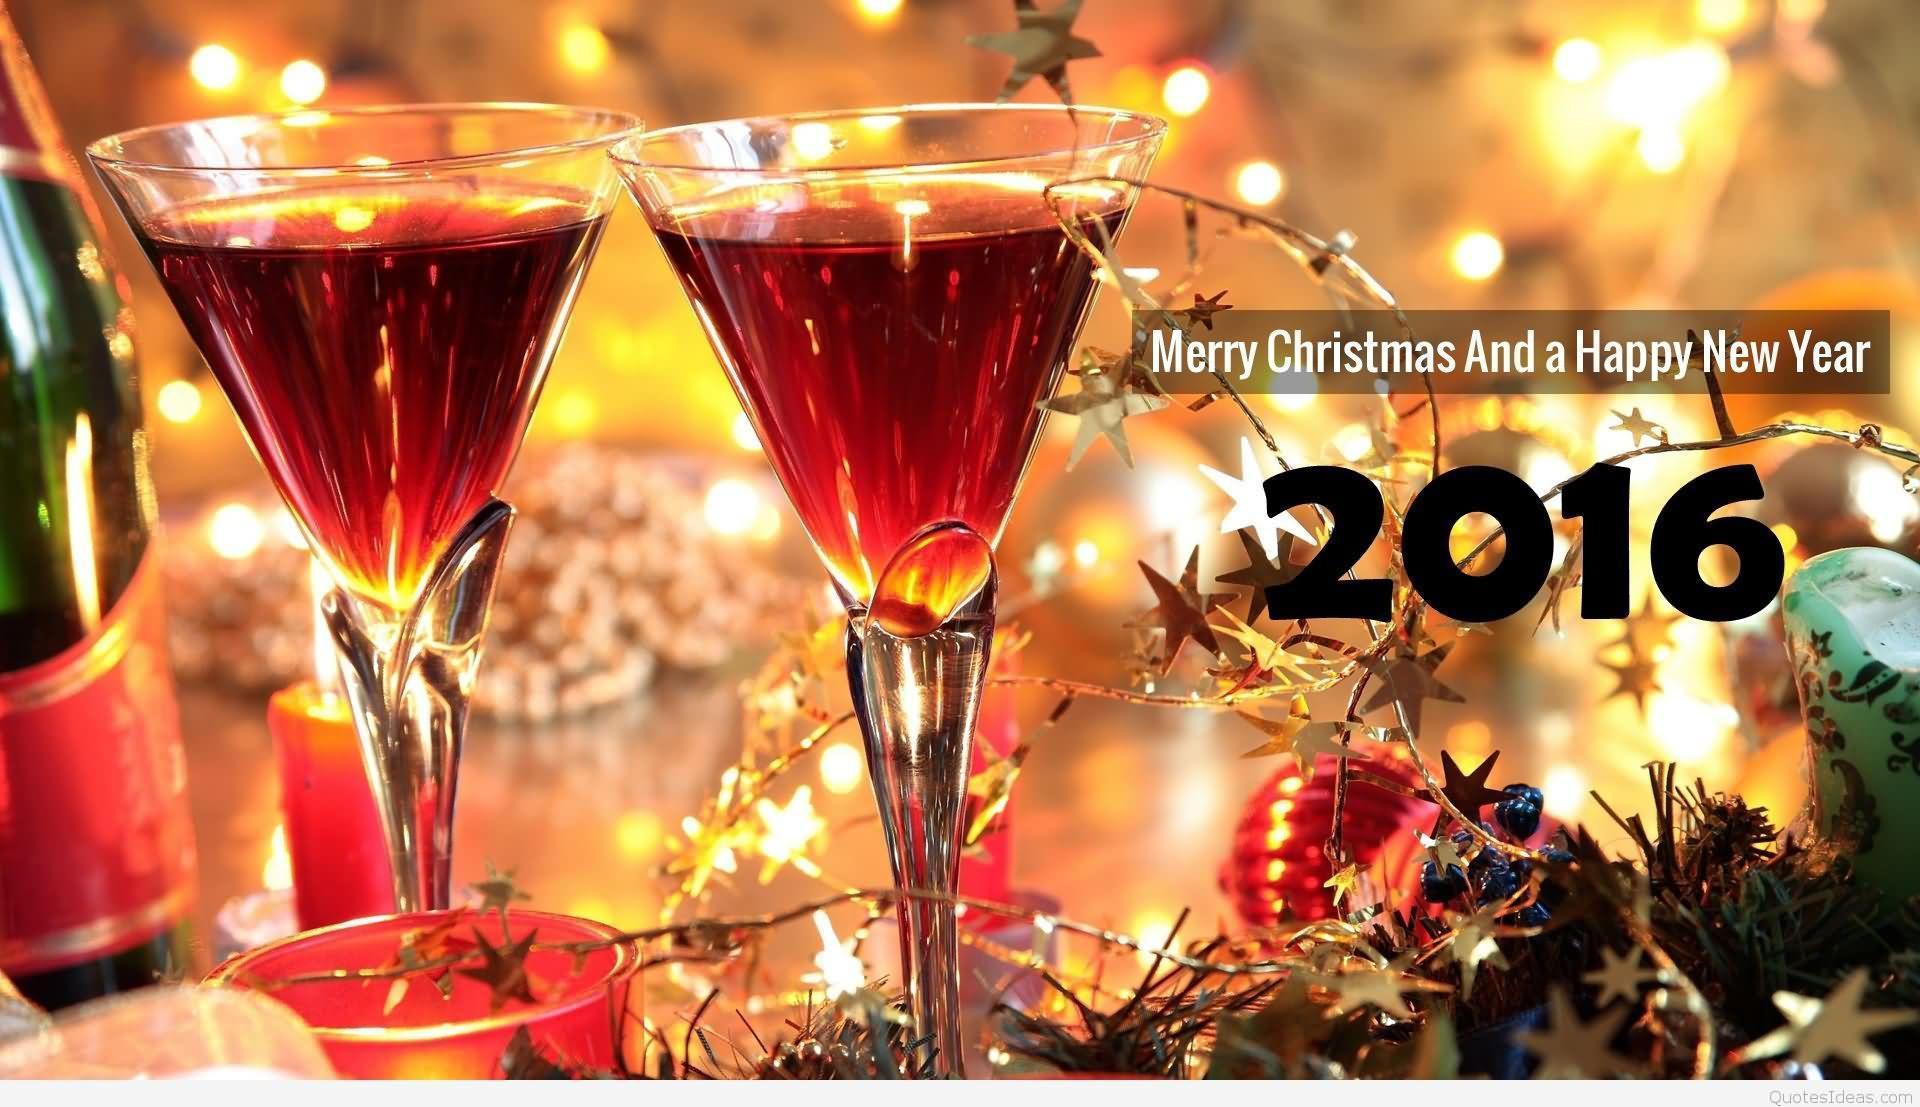 Red Wine Glasses Merry Christmas And Happy New Year 2016 Wallpaper